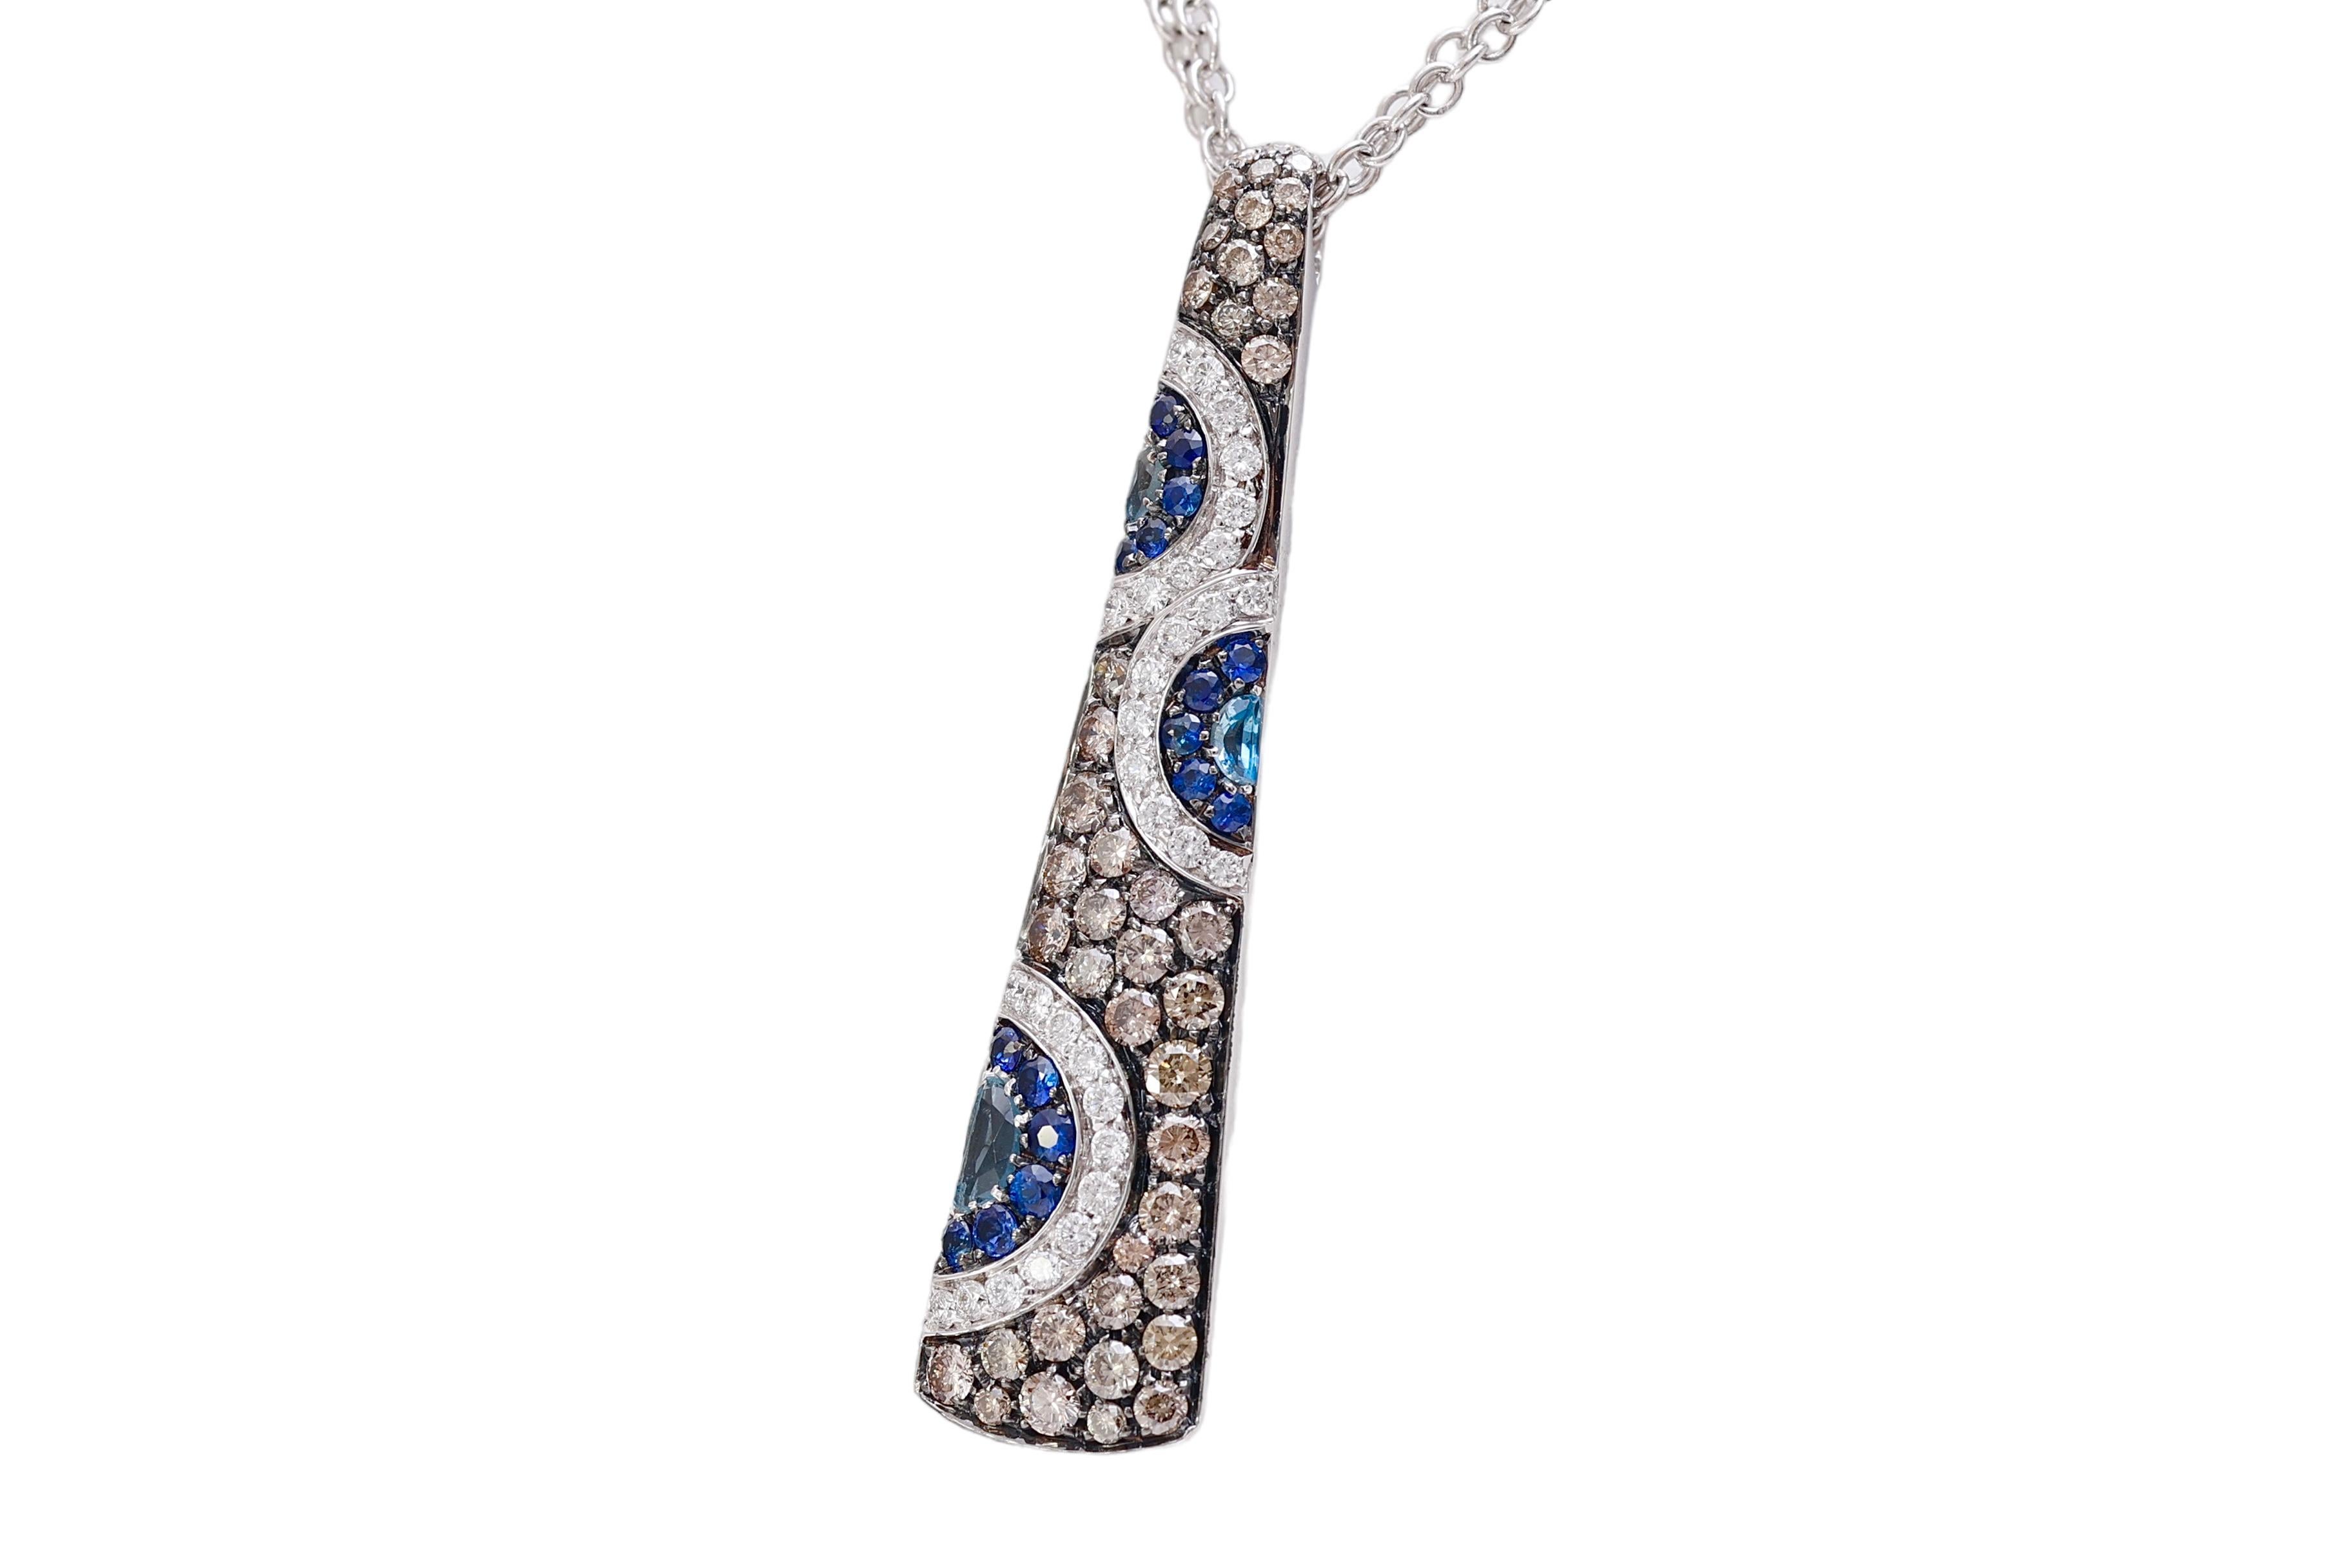 Gorgeous 18 kt. White Gold Pendant/ Necklace With White & Cognac Diamonds and Sapphires  

Diamonds: White brilliant cut diamonds together 0.36 ct. Brilliant cut cognac diamonds together 1.15 ct.

Sapphires: small cut sapphires, together 0.35